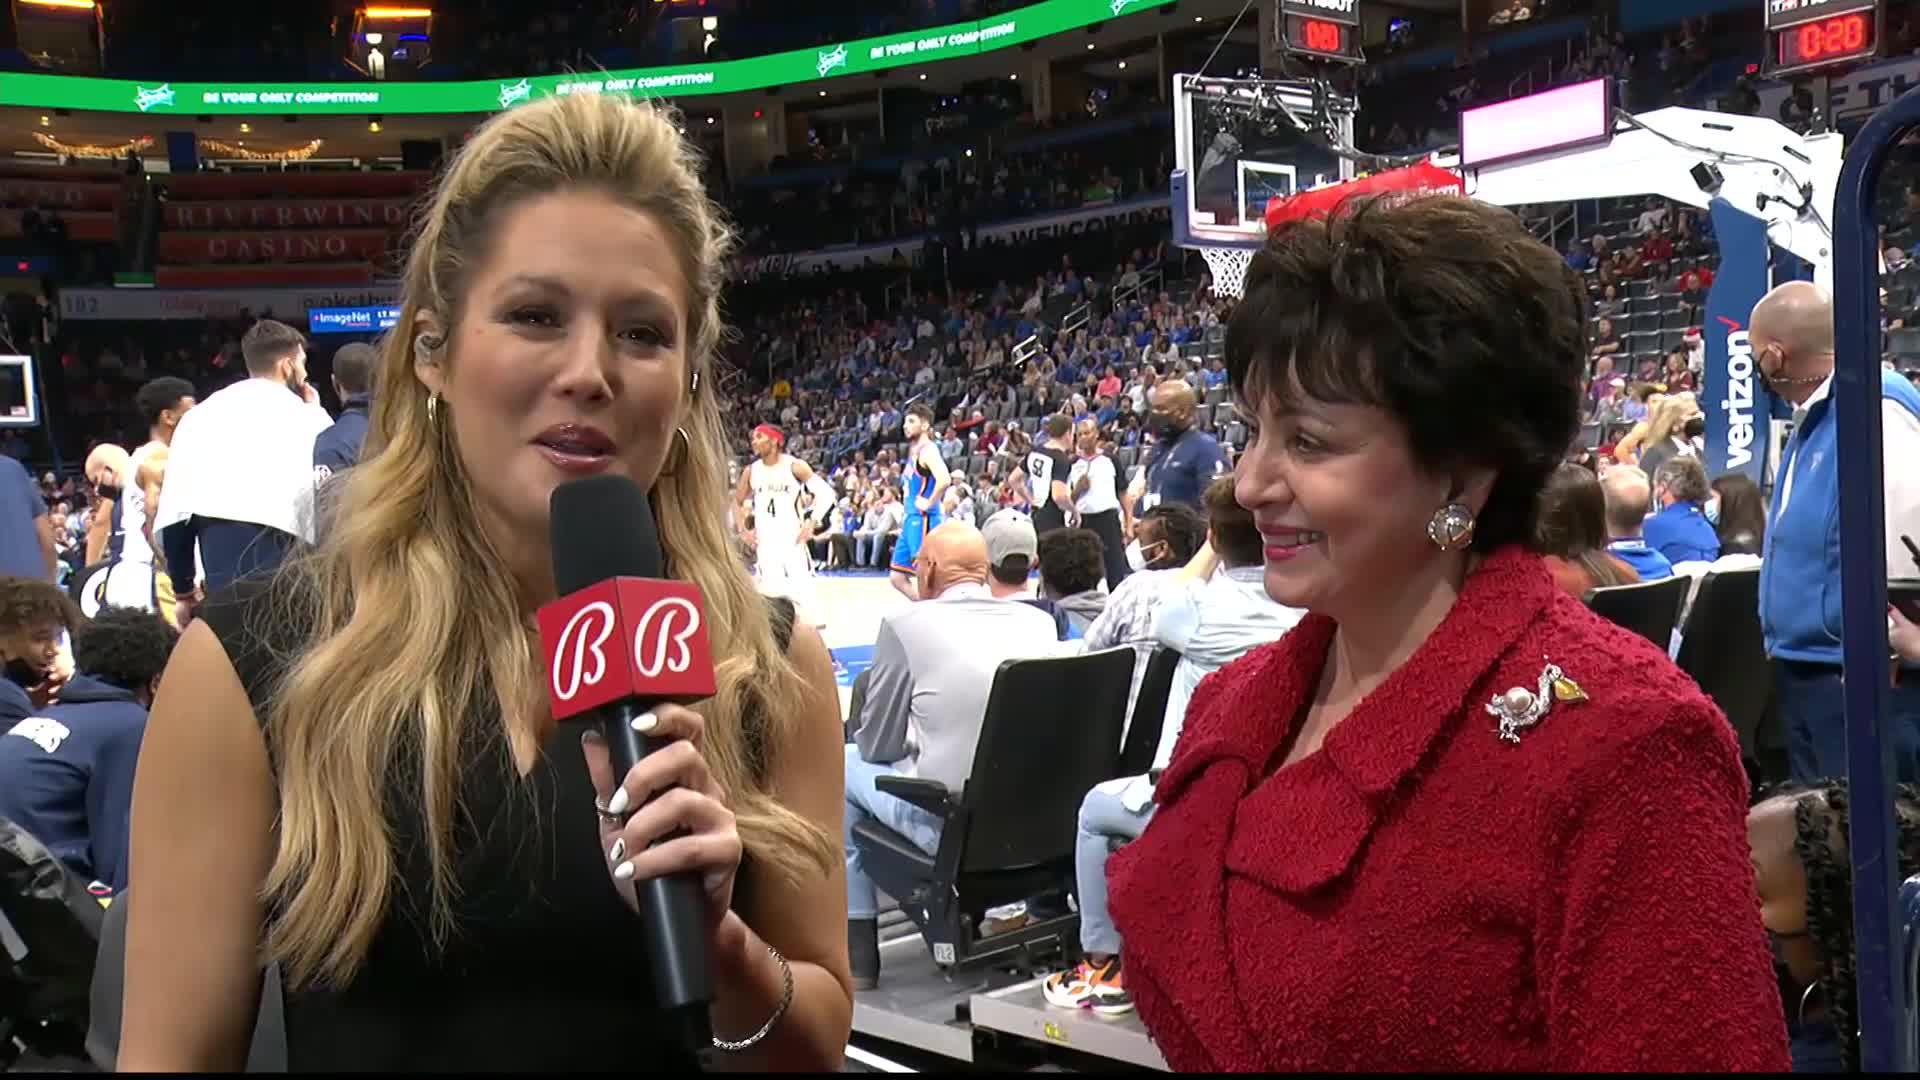 Courtside Interview with Pelicans governor Gayle Benson | Pelicans-Thunder 12/15/21